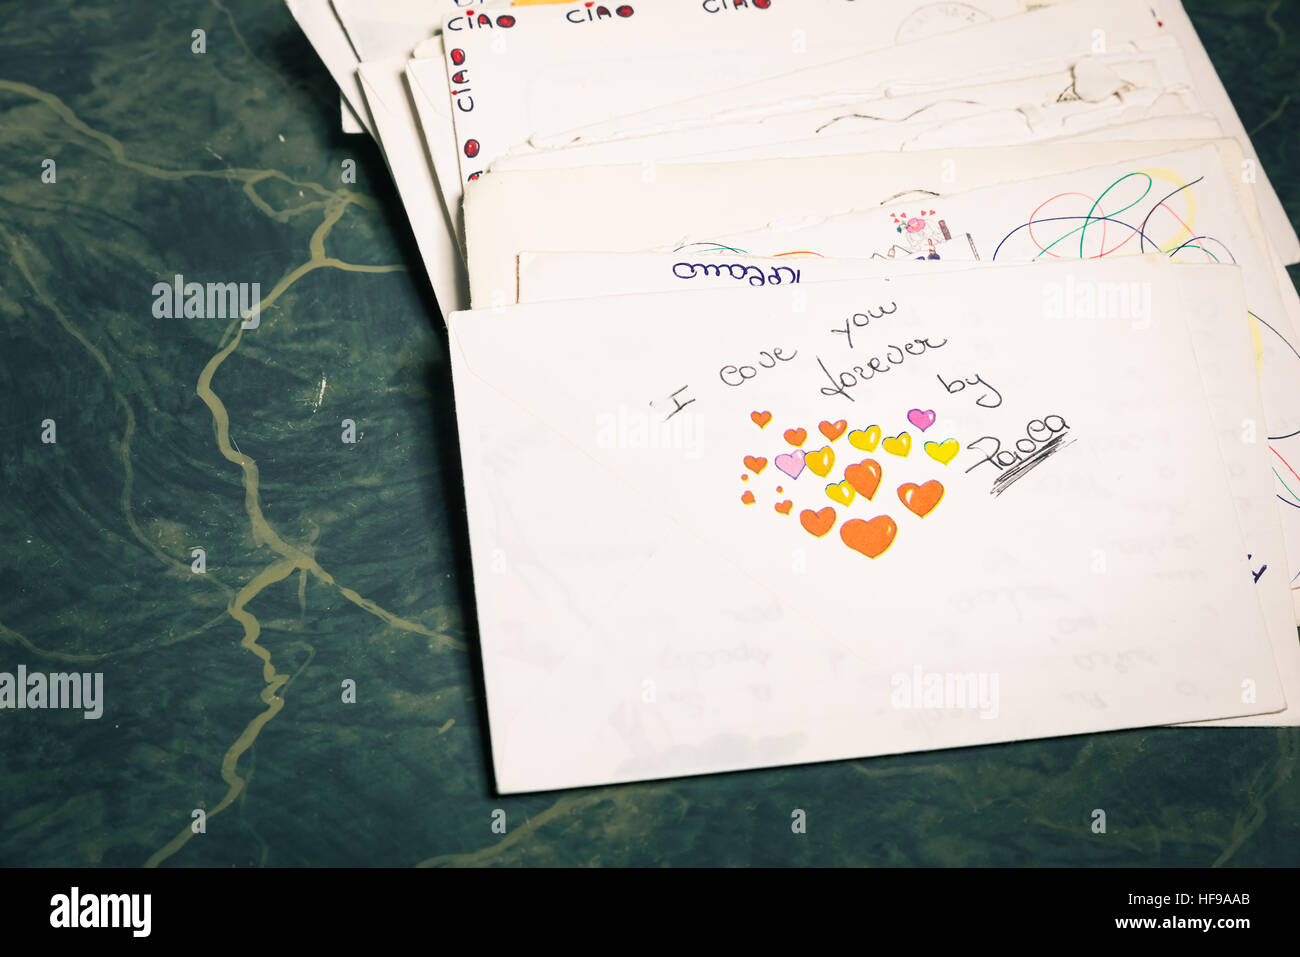 Big stack of mails, pile of papers, or heap of letters, above a letter saying 'I love you forever ...'. Stock Photo